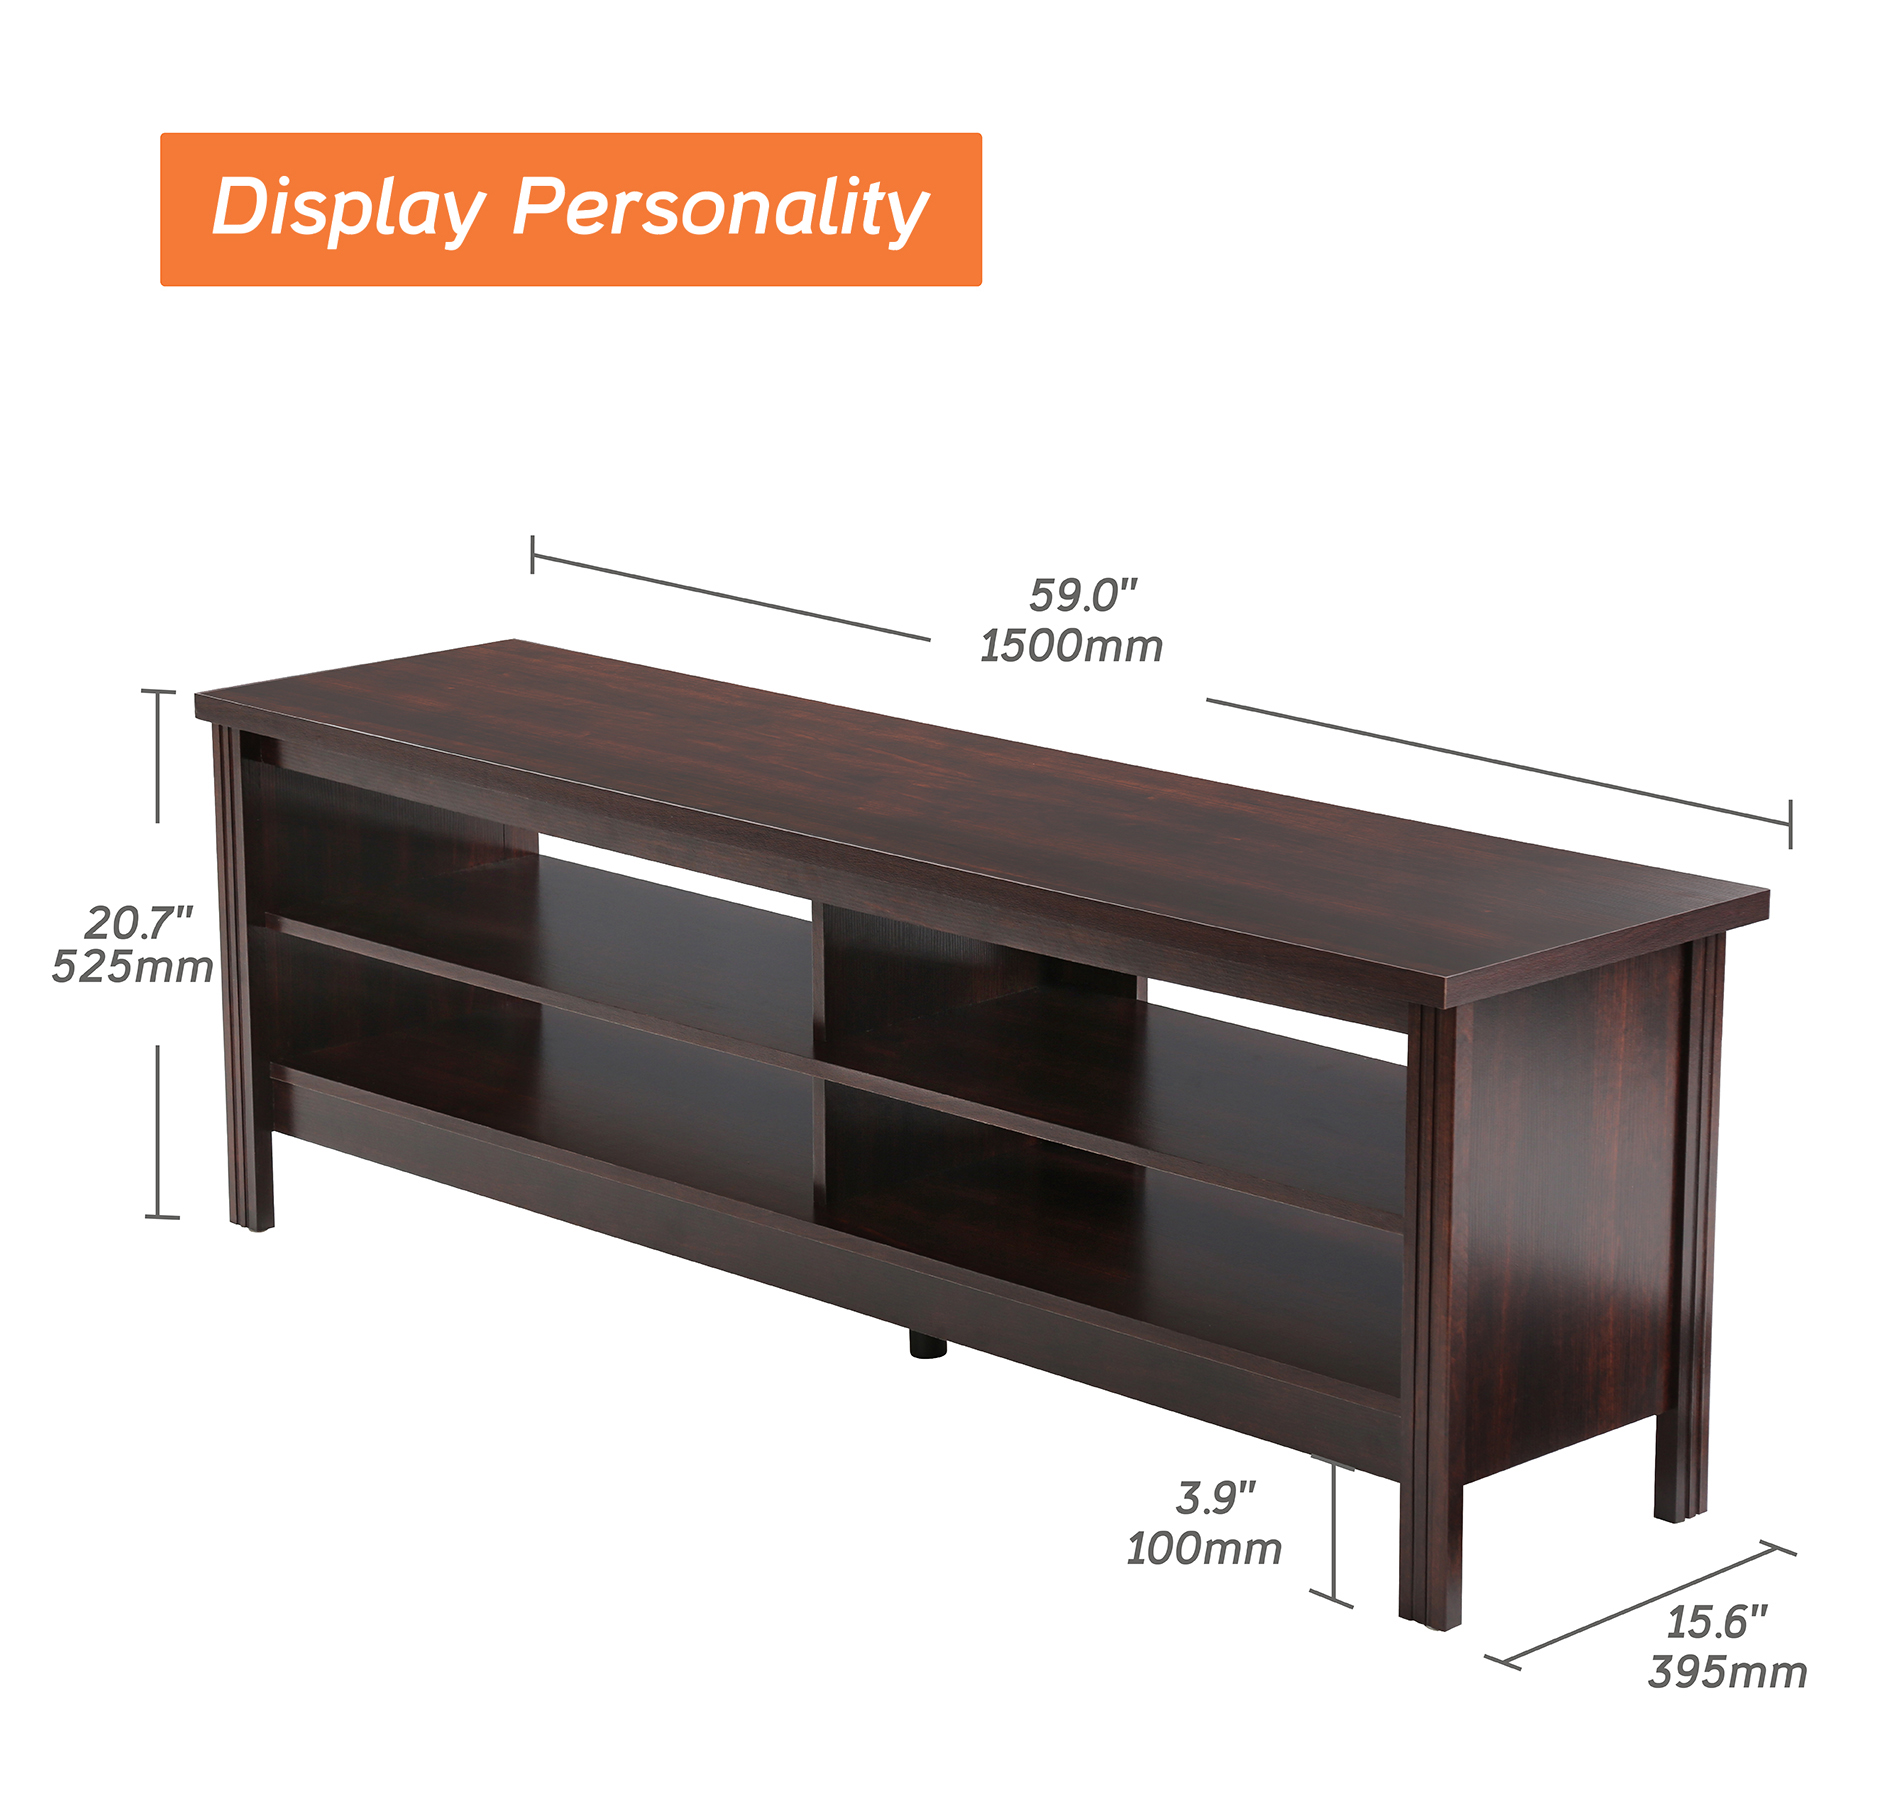 Farmhouse TV Stands for 65 inch Flat Screen,Wood Media Console for bedroom and living room,59 inch,Walnut - image 5 of 5